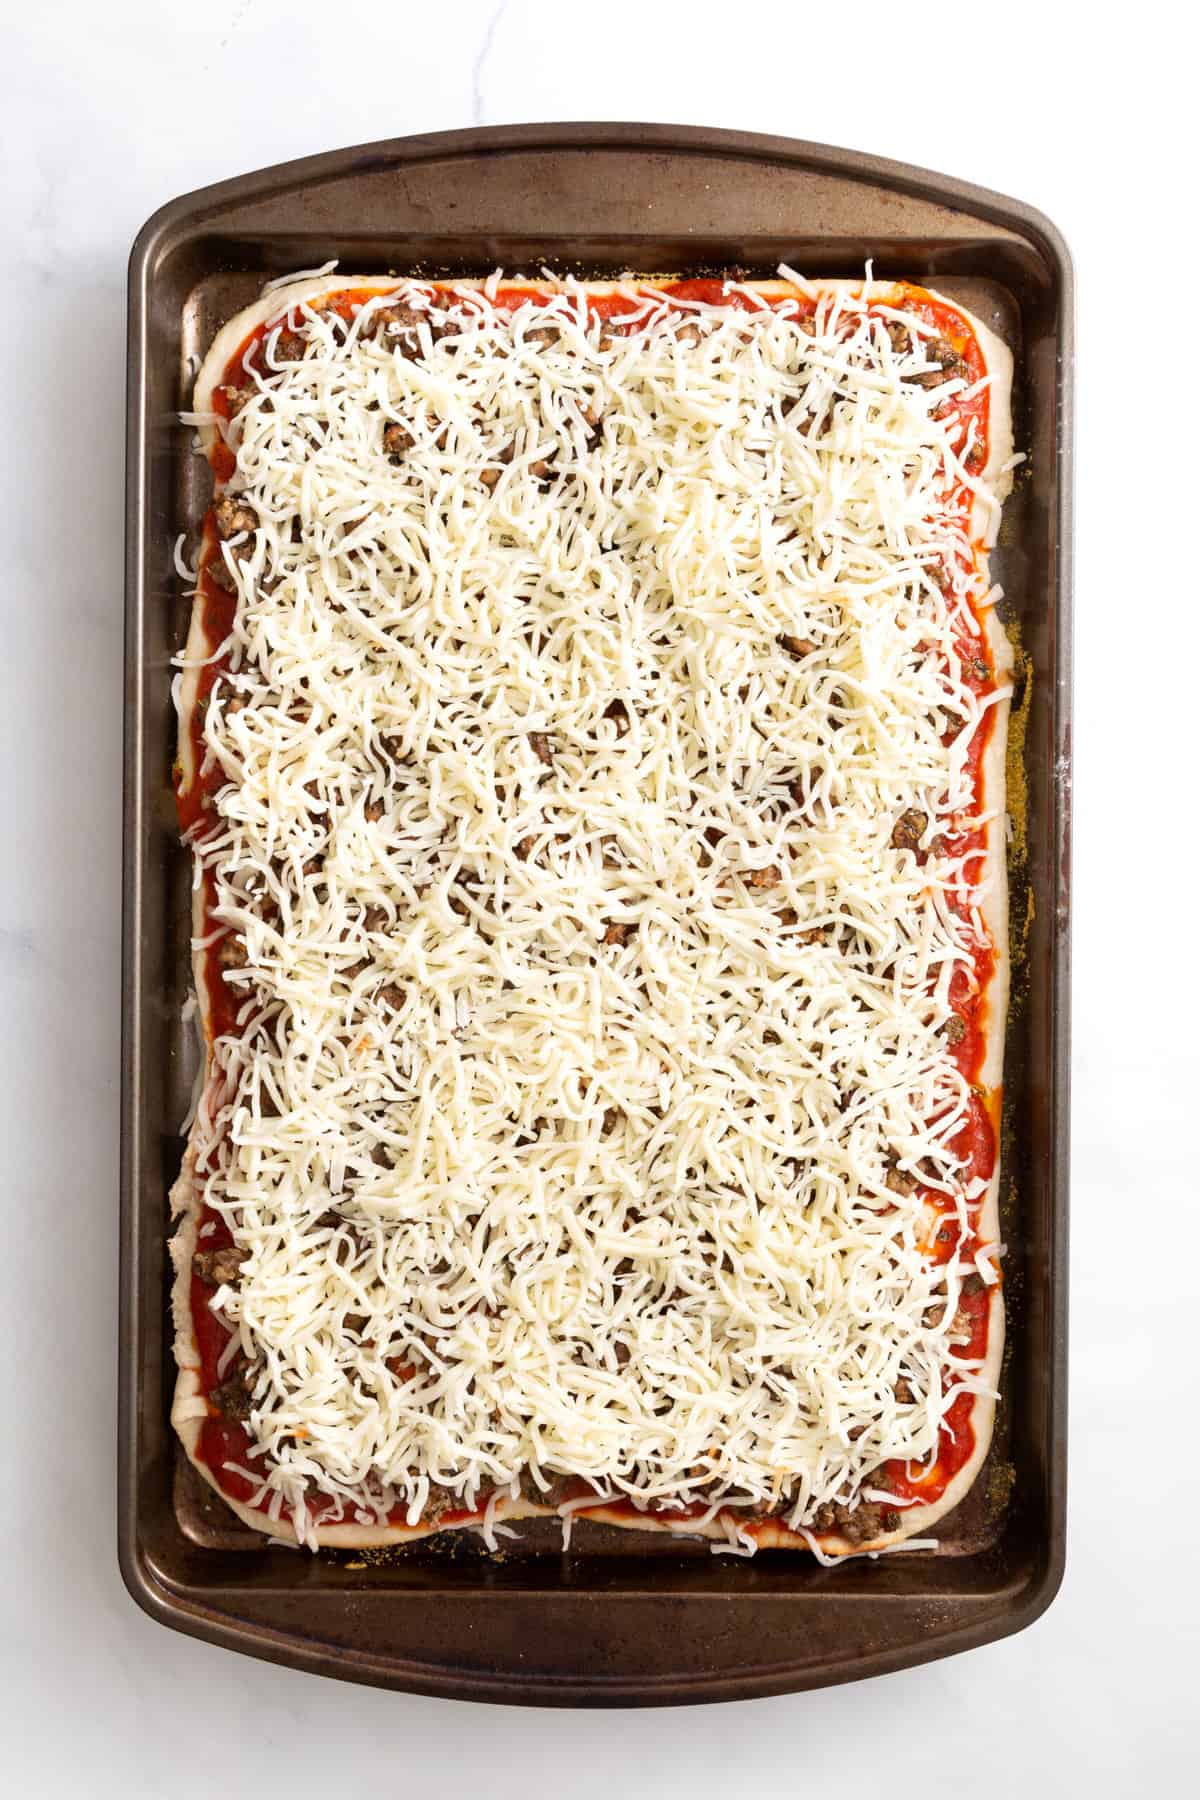 pizza dough layered at the bottom of a sheet pan, with pizza sauce, cooked sausage and shredded mozzarella